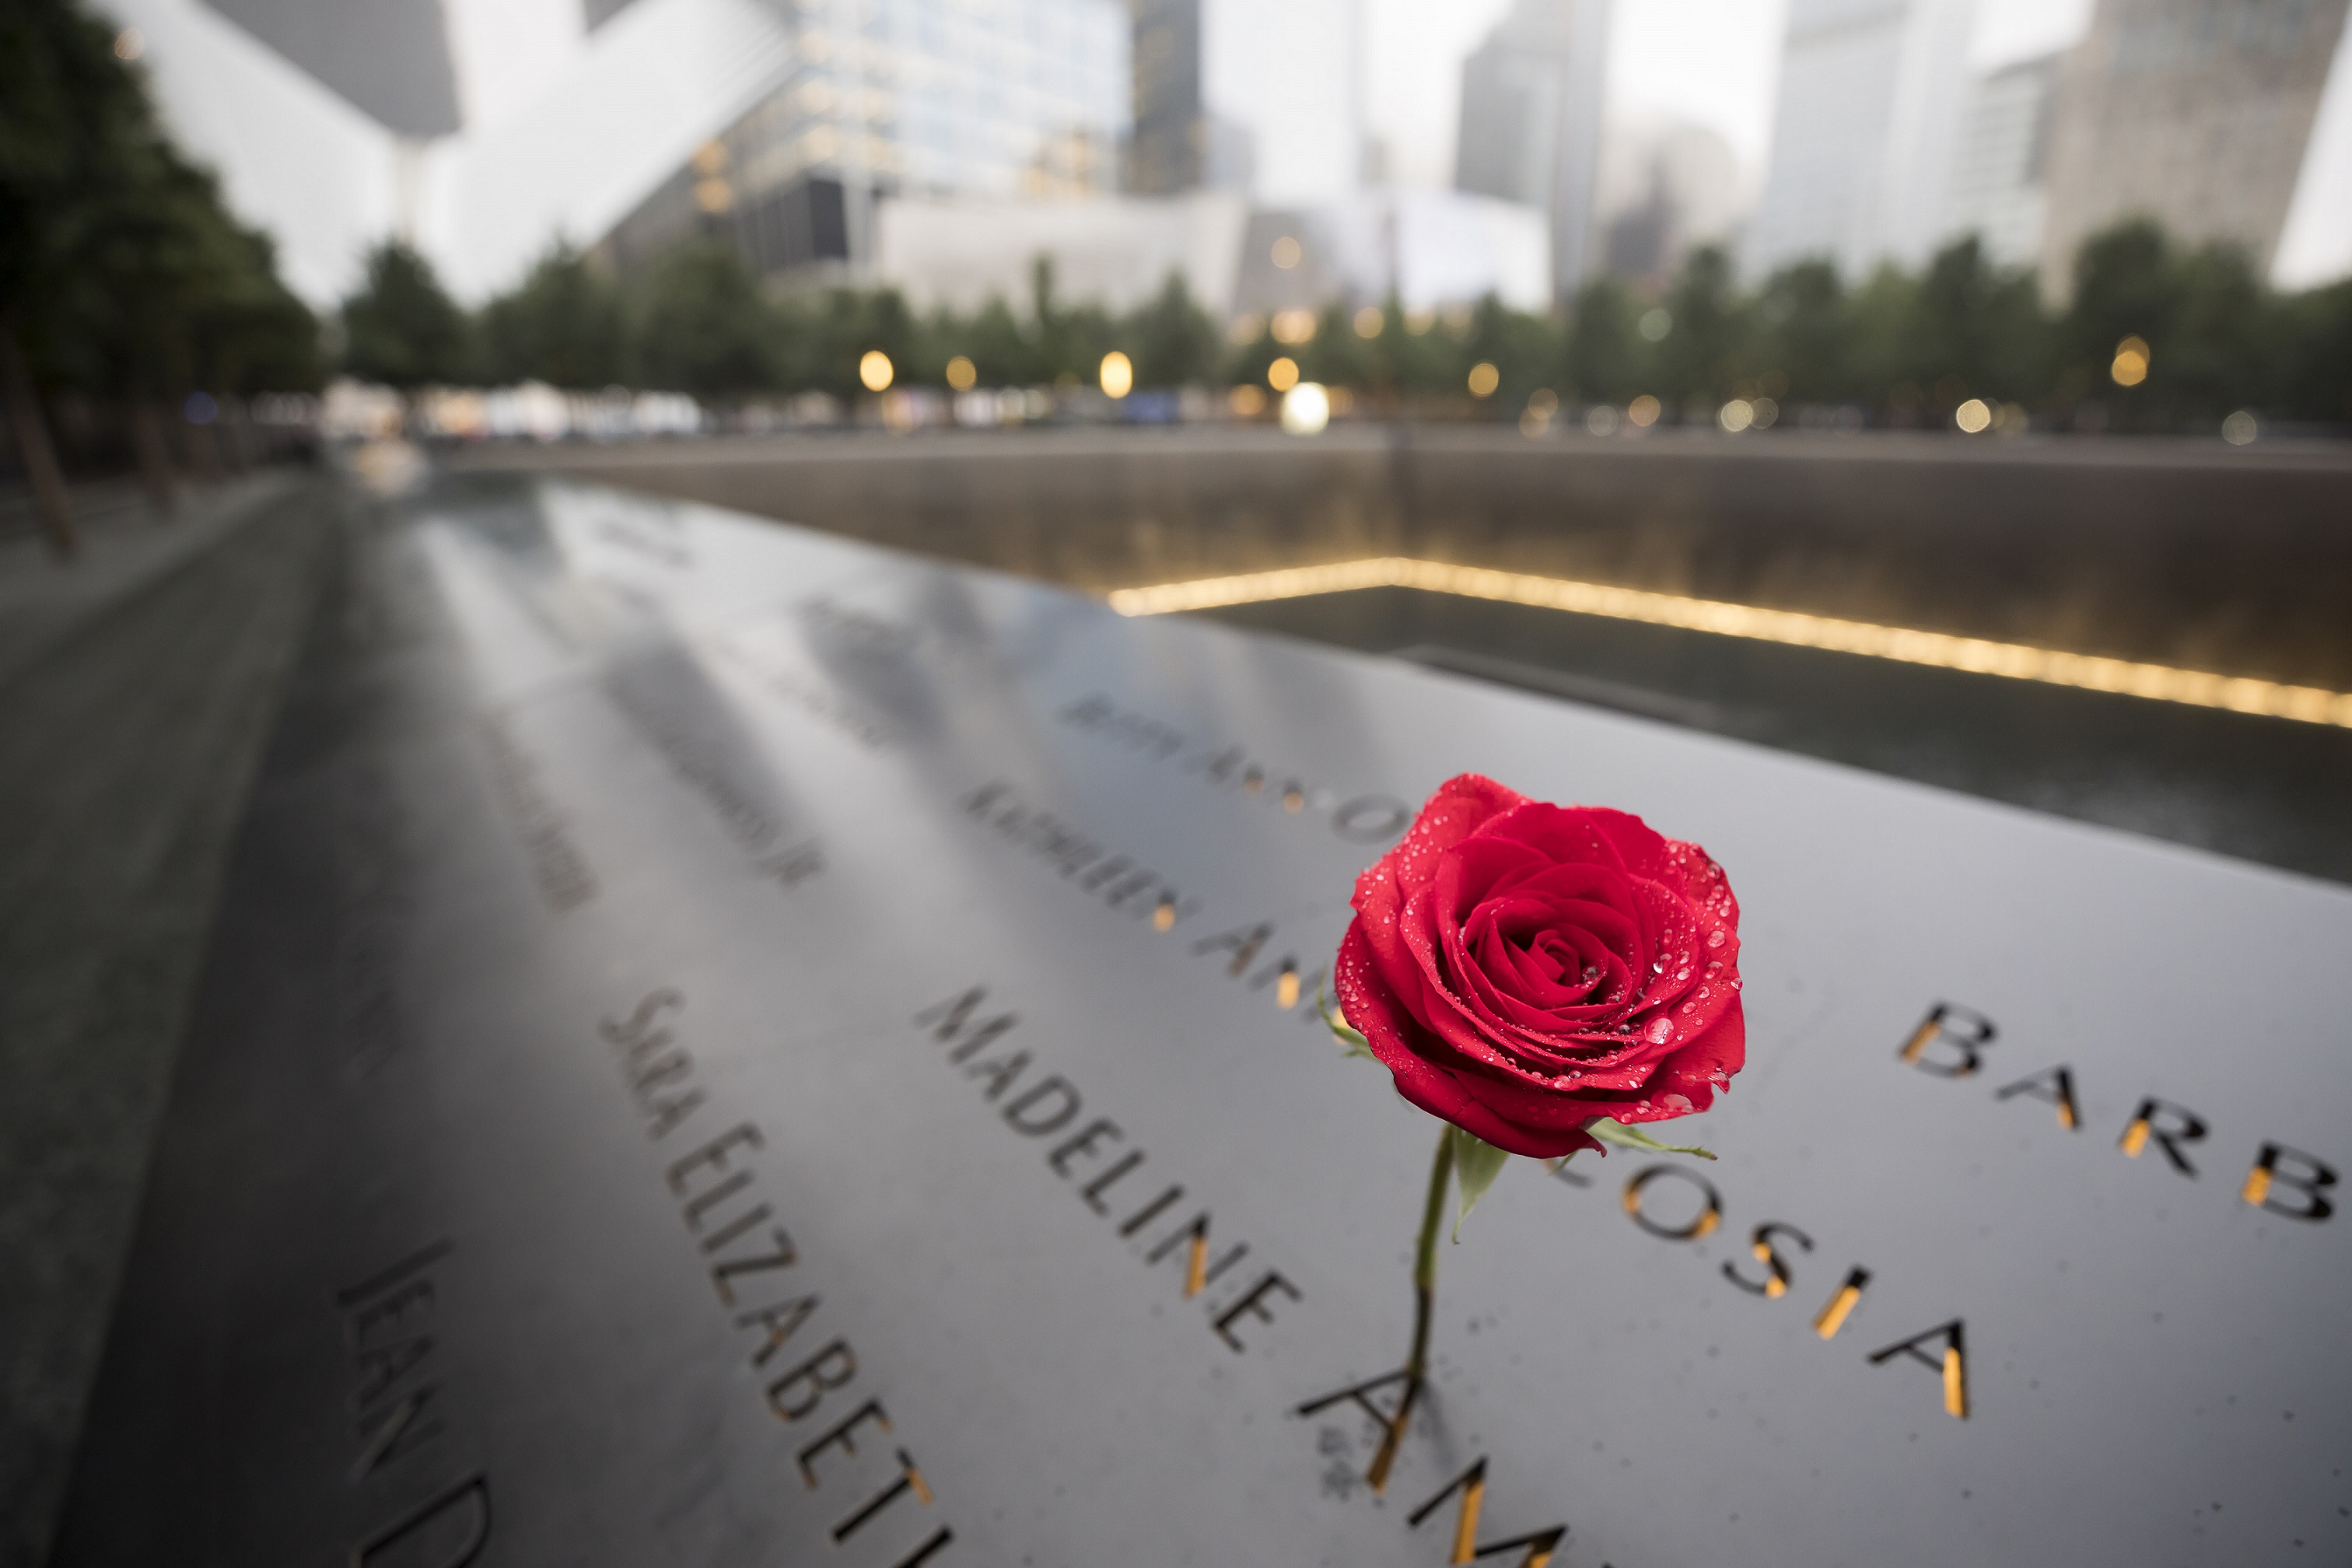 A single red rose stands at a name on a bronze parapet surrounding the lit-up reflecting pool in the footprint of the North Tower. The names of victims blur out of focus in the background.